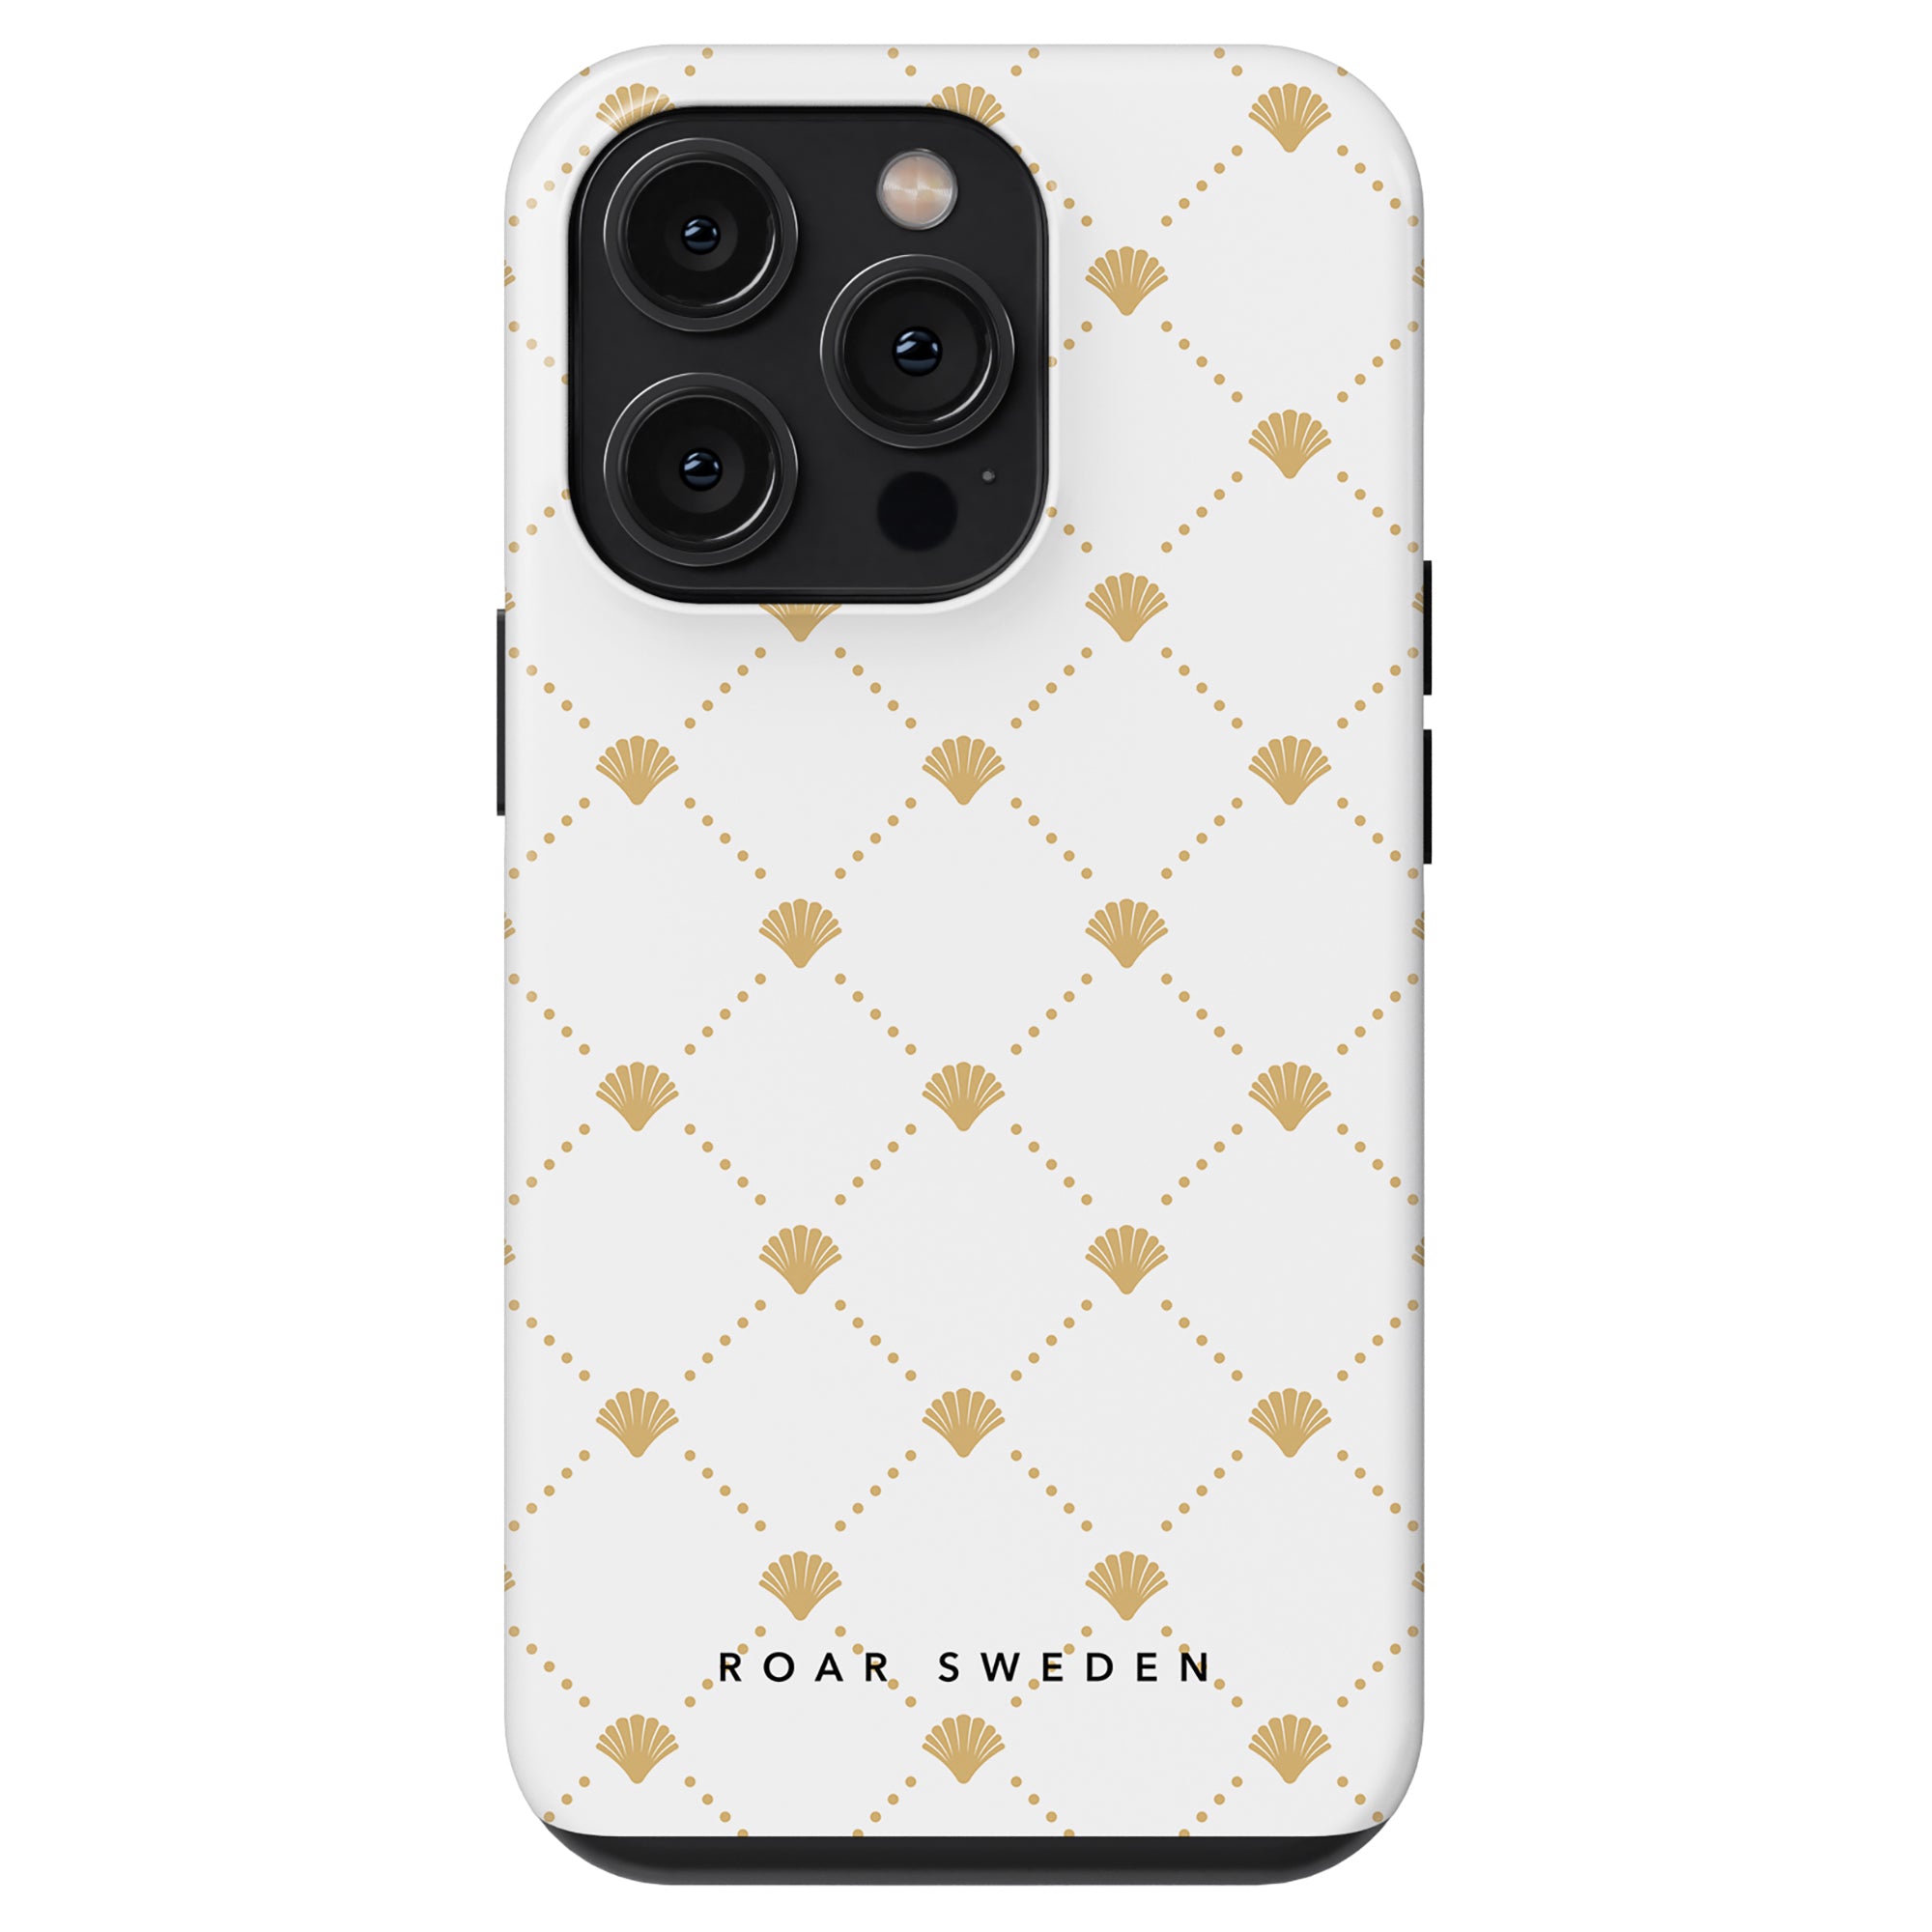 Luxe Shells White - Tough Case with a patterned white and gold design, featuring a diamond and shell motif from the Ocean Collection. The Luxe Shells White - Tough Case is branded "Roar Sweden".